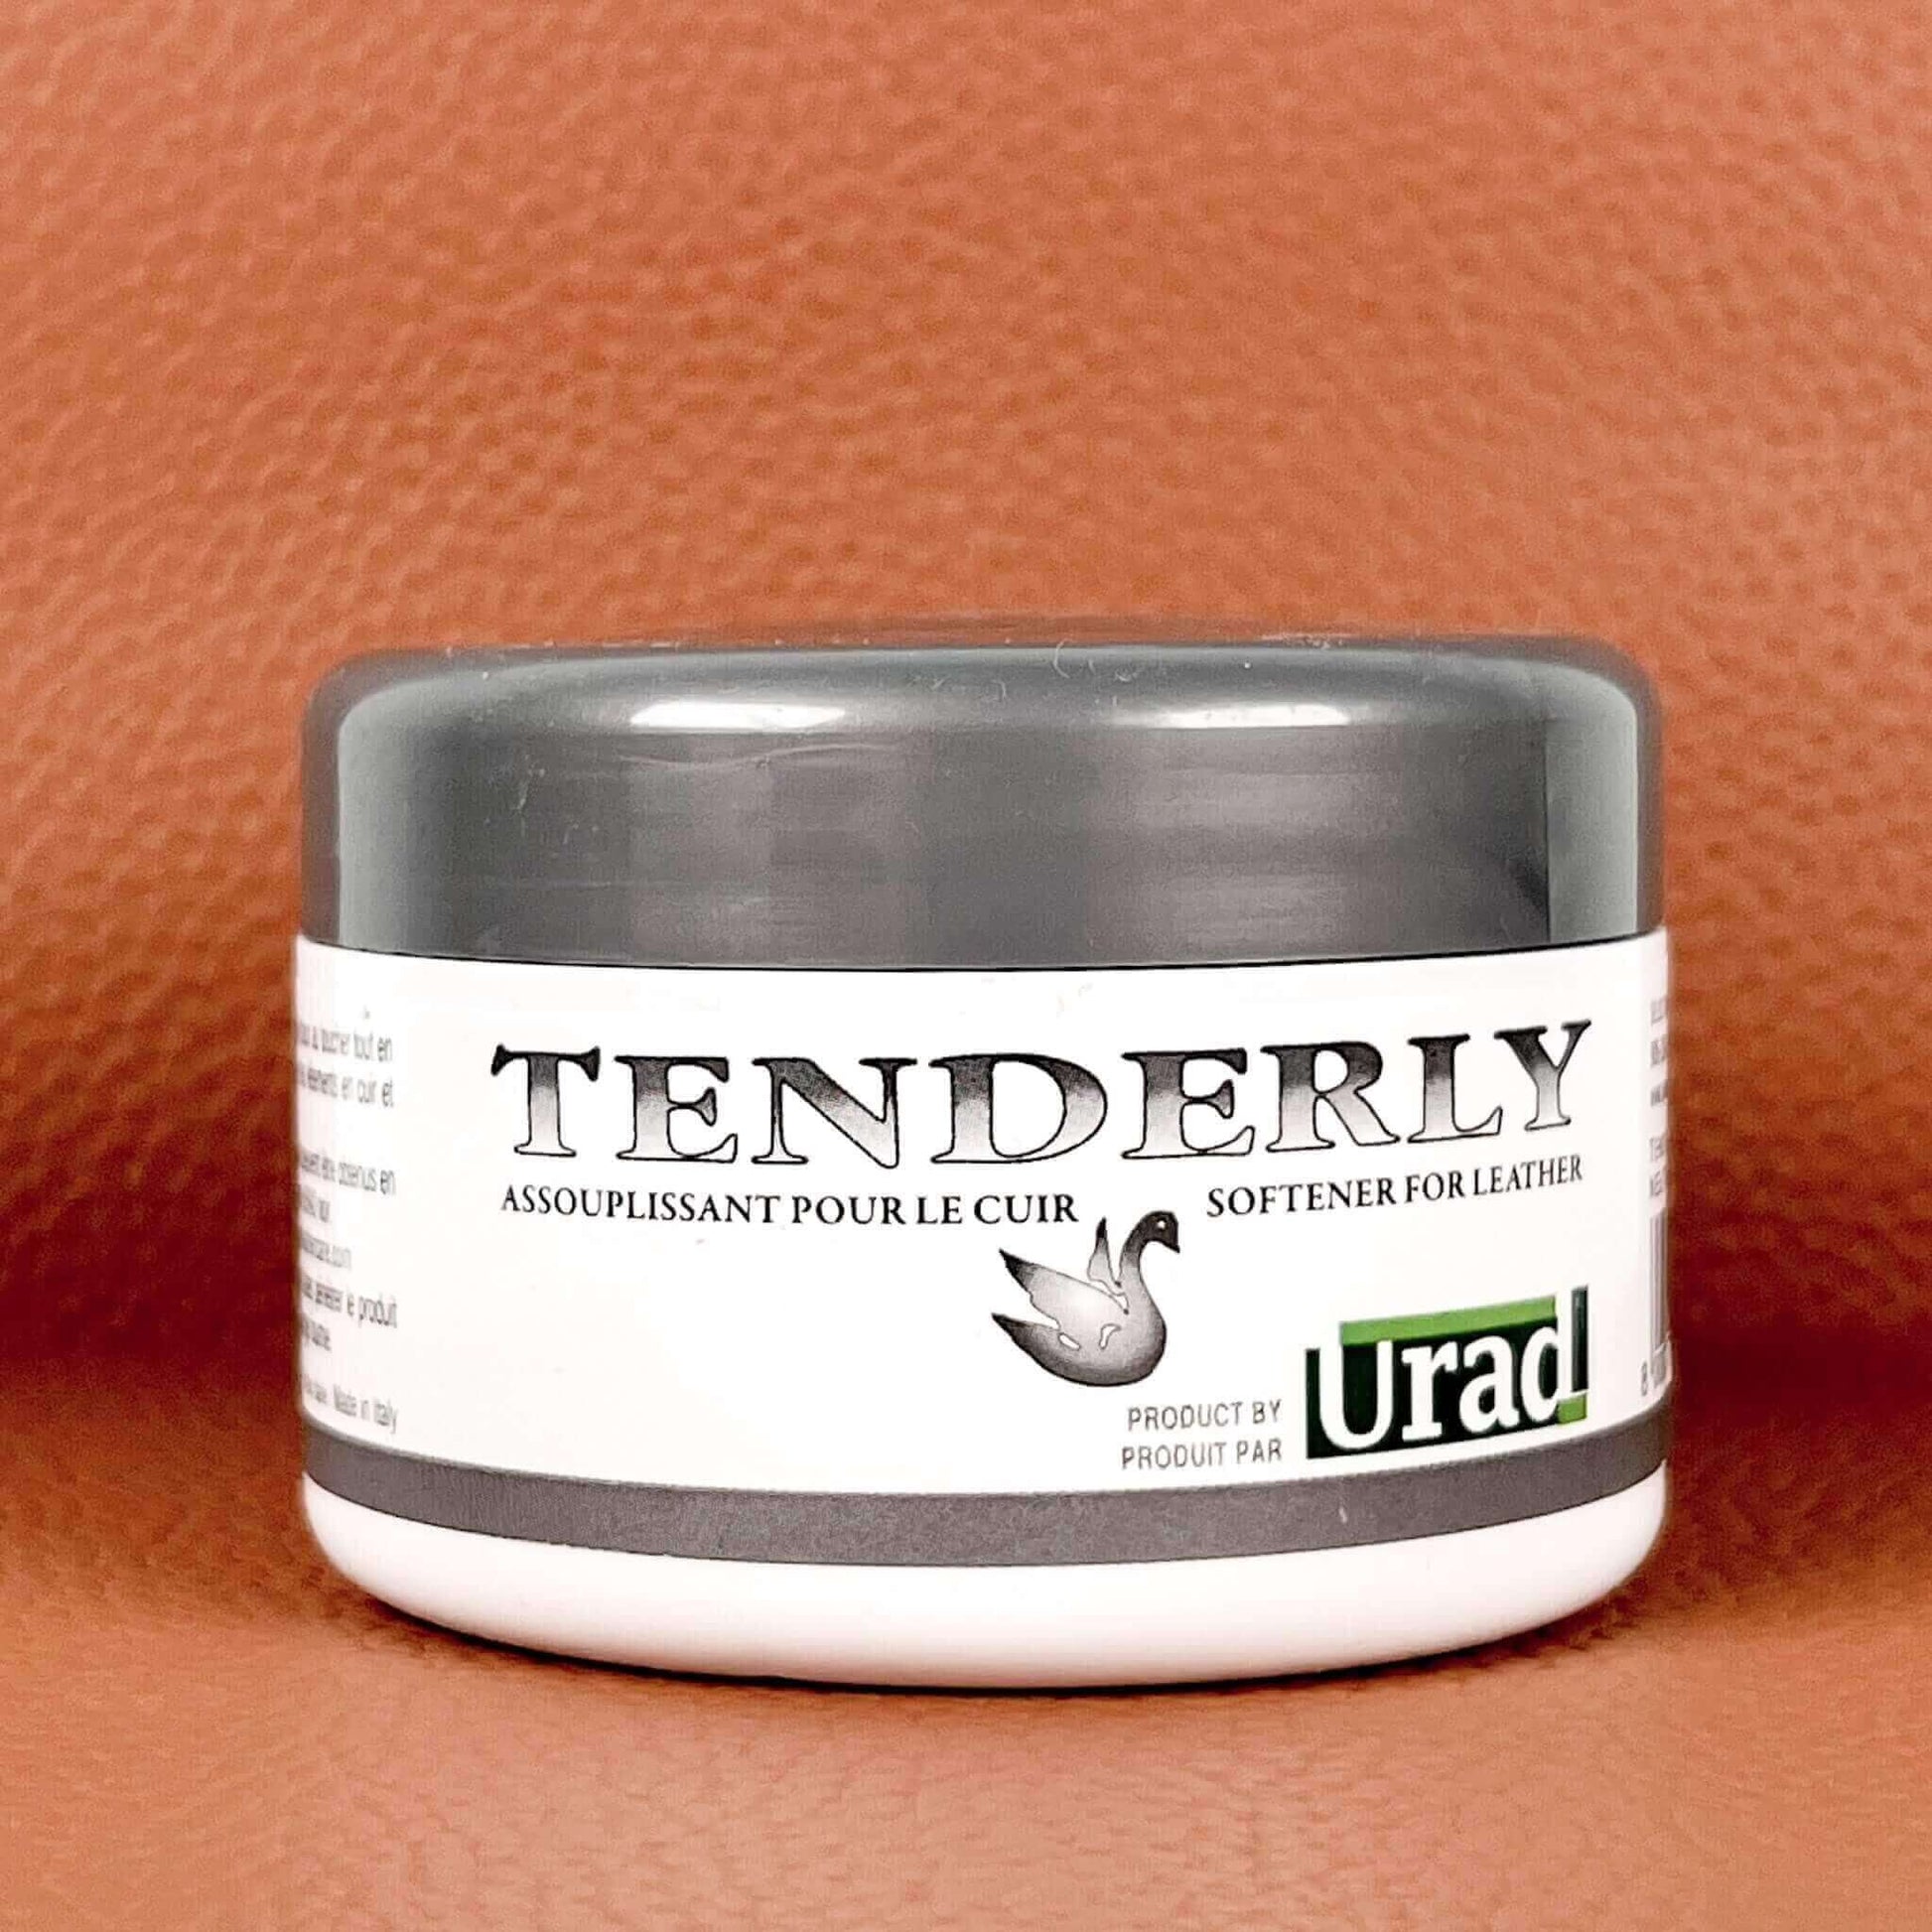 Tenderly is a great choice for those in need of a shoe moisturizer or a leather couch moisturizer. Its specialized formula can penetrate deeply into the leather fibers, restoring moisture and protecting against damage caused by dryness.